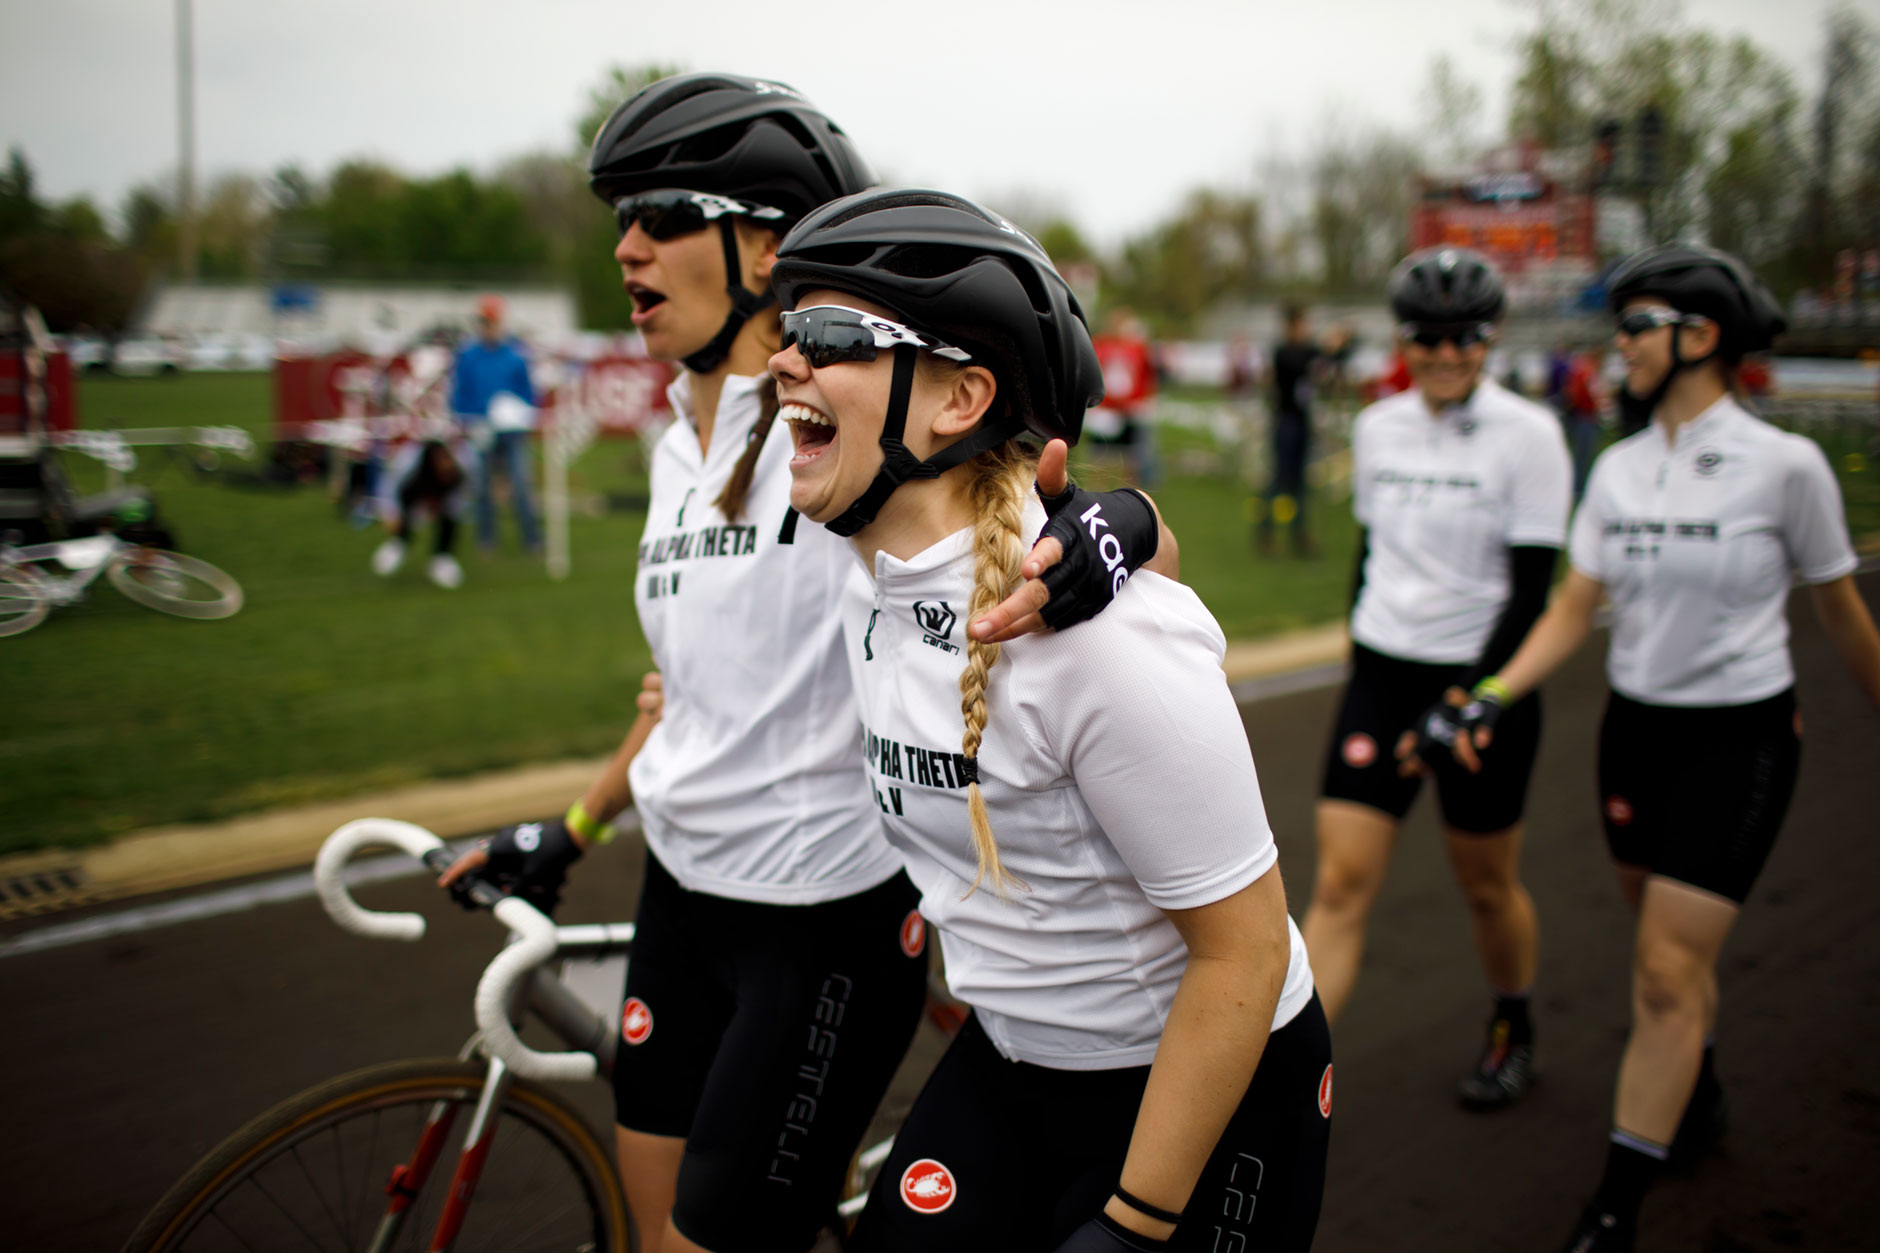 Kappa Alpha Theta's Sydney Keaton, right, shares a laugh with teammate Evelyn Malcomb as the team lines up for the parade lap before the Women's Little 500 at Bill Armstrong Stadium on Friday, April 21, 2017. (James Brosher/IU Communications)